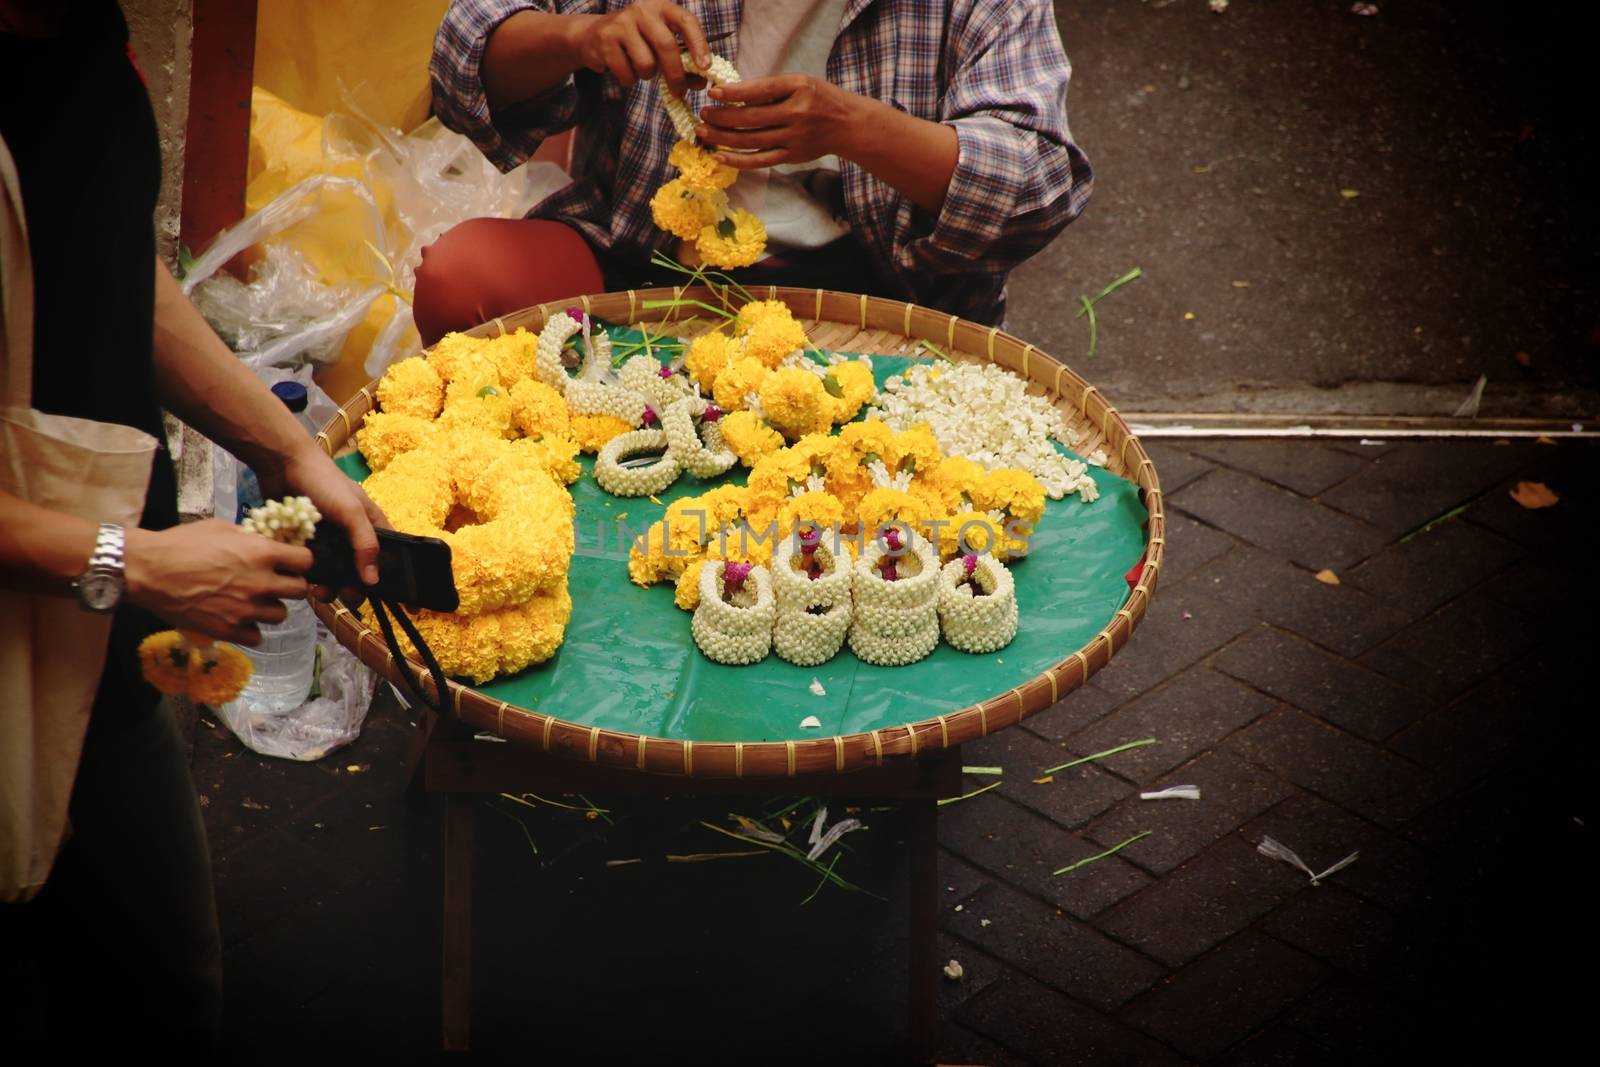 Thai street vendor selling Phuang malai or malai, which is a flower garland used for buddhist offerings and charms for good luck in the Thai culture and religion